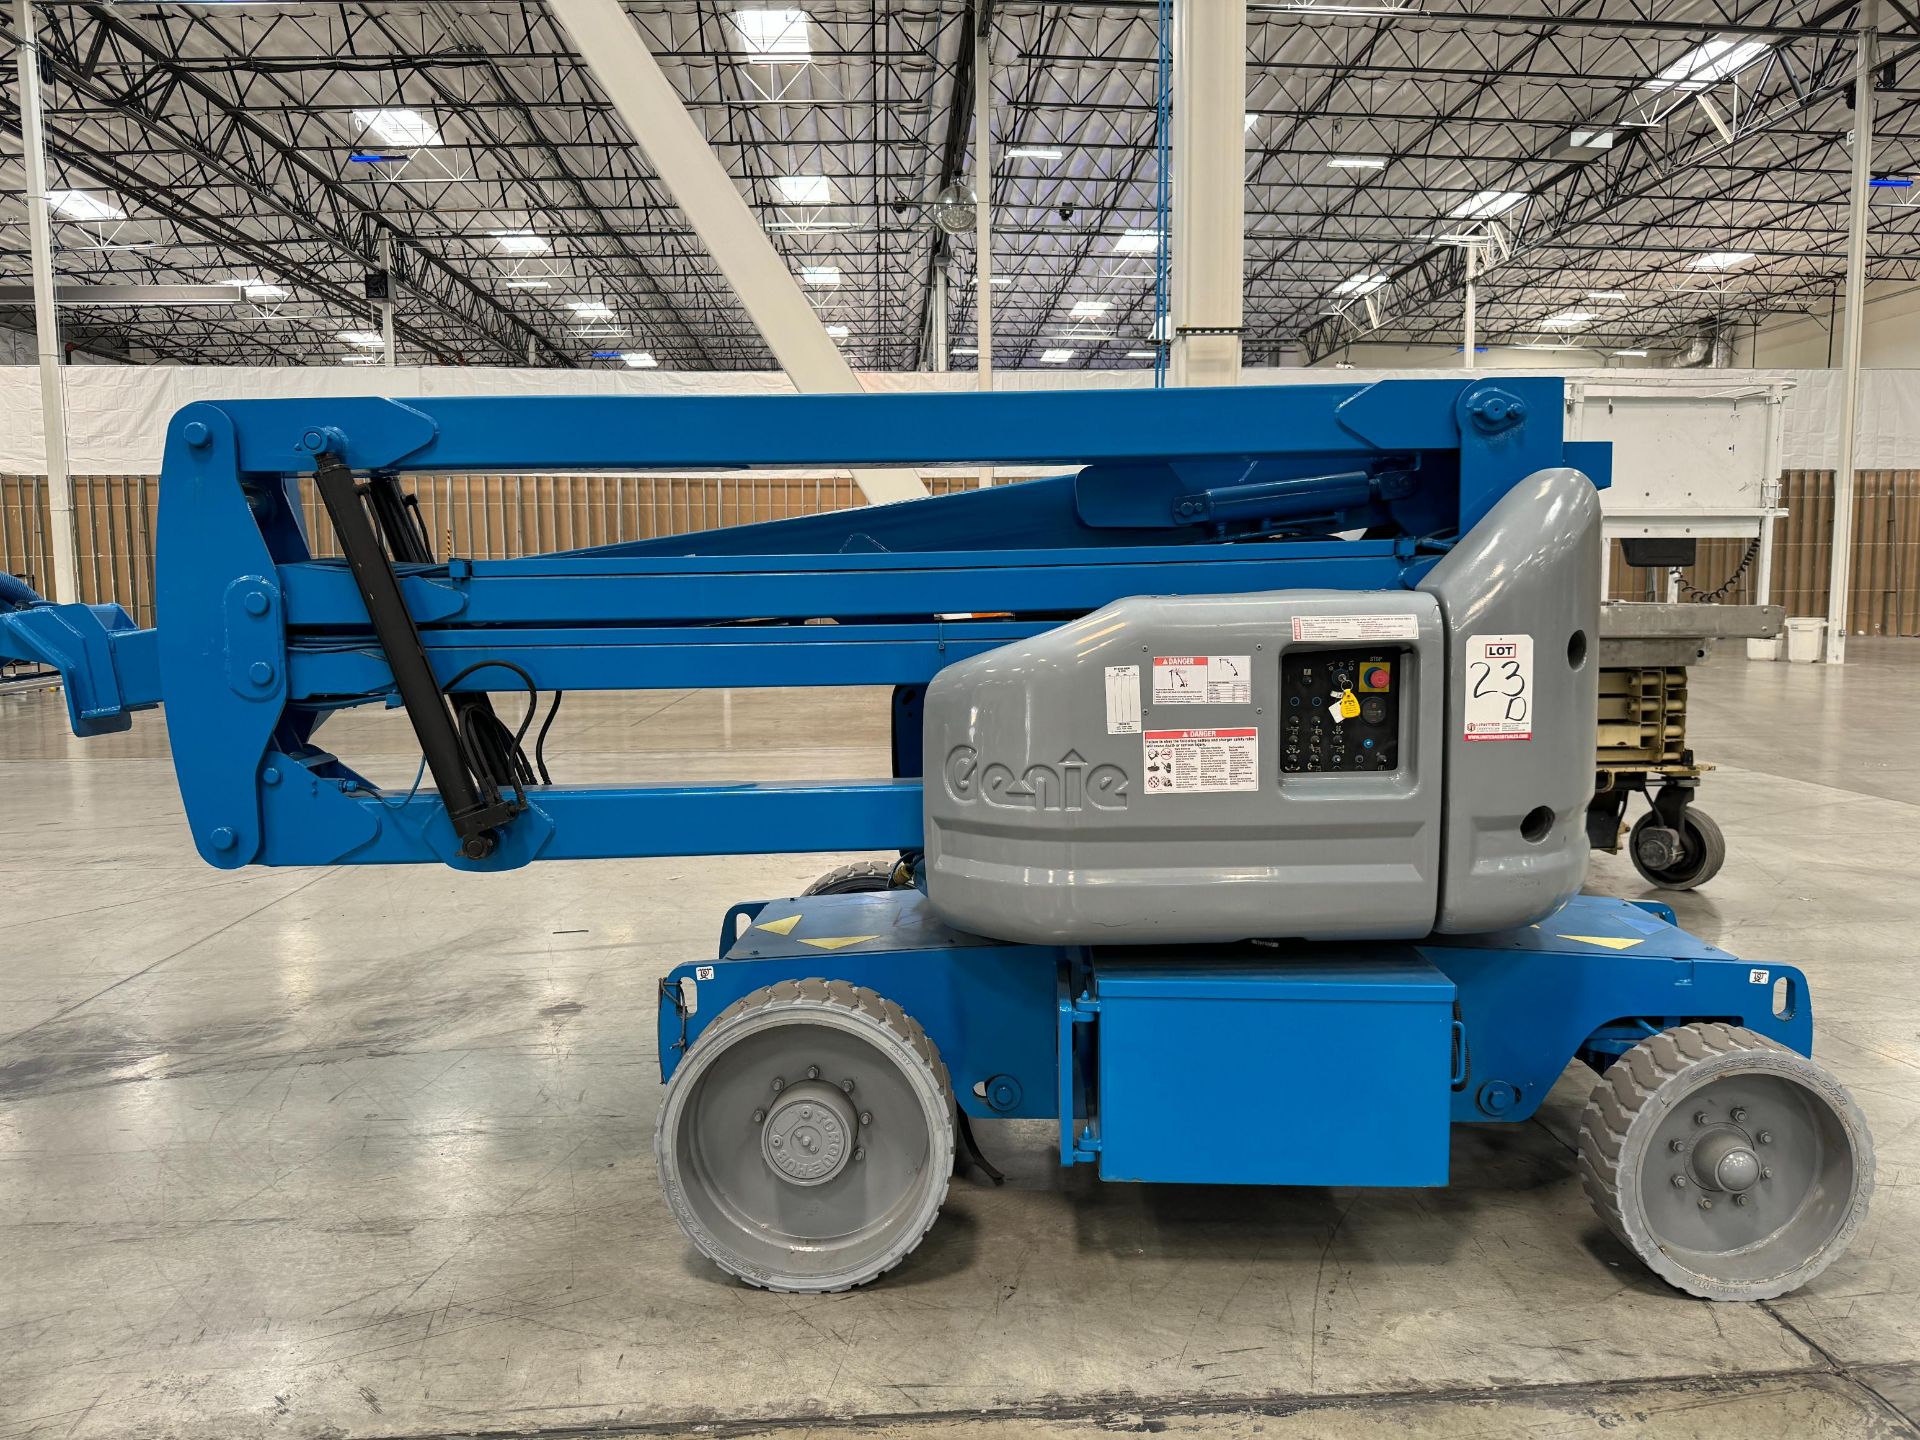 2010 GENIE ARTICULATED BOOM LIFT, MODEL Z-40/23N RJ, MAX WORKING HEIGHT: 46'5", MAX HORIZONTAL - Image 3 of 18